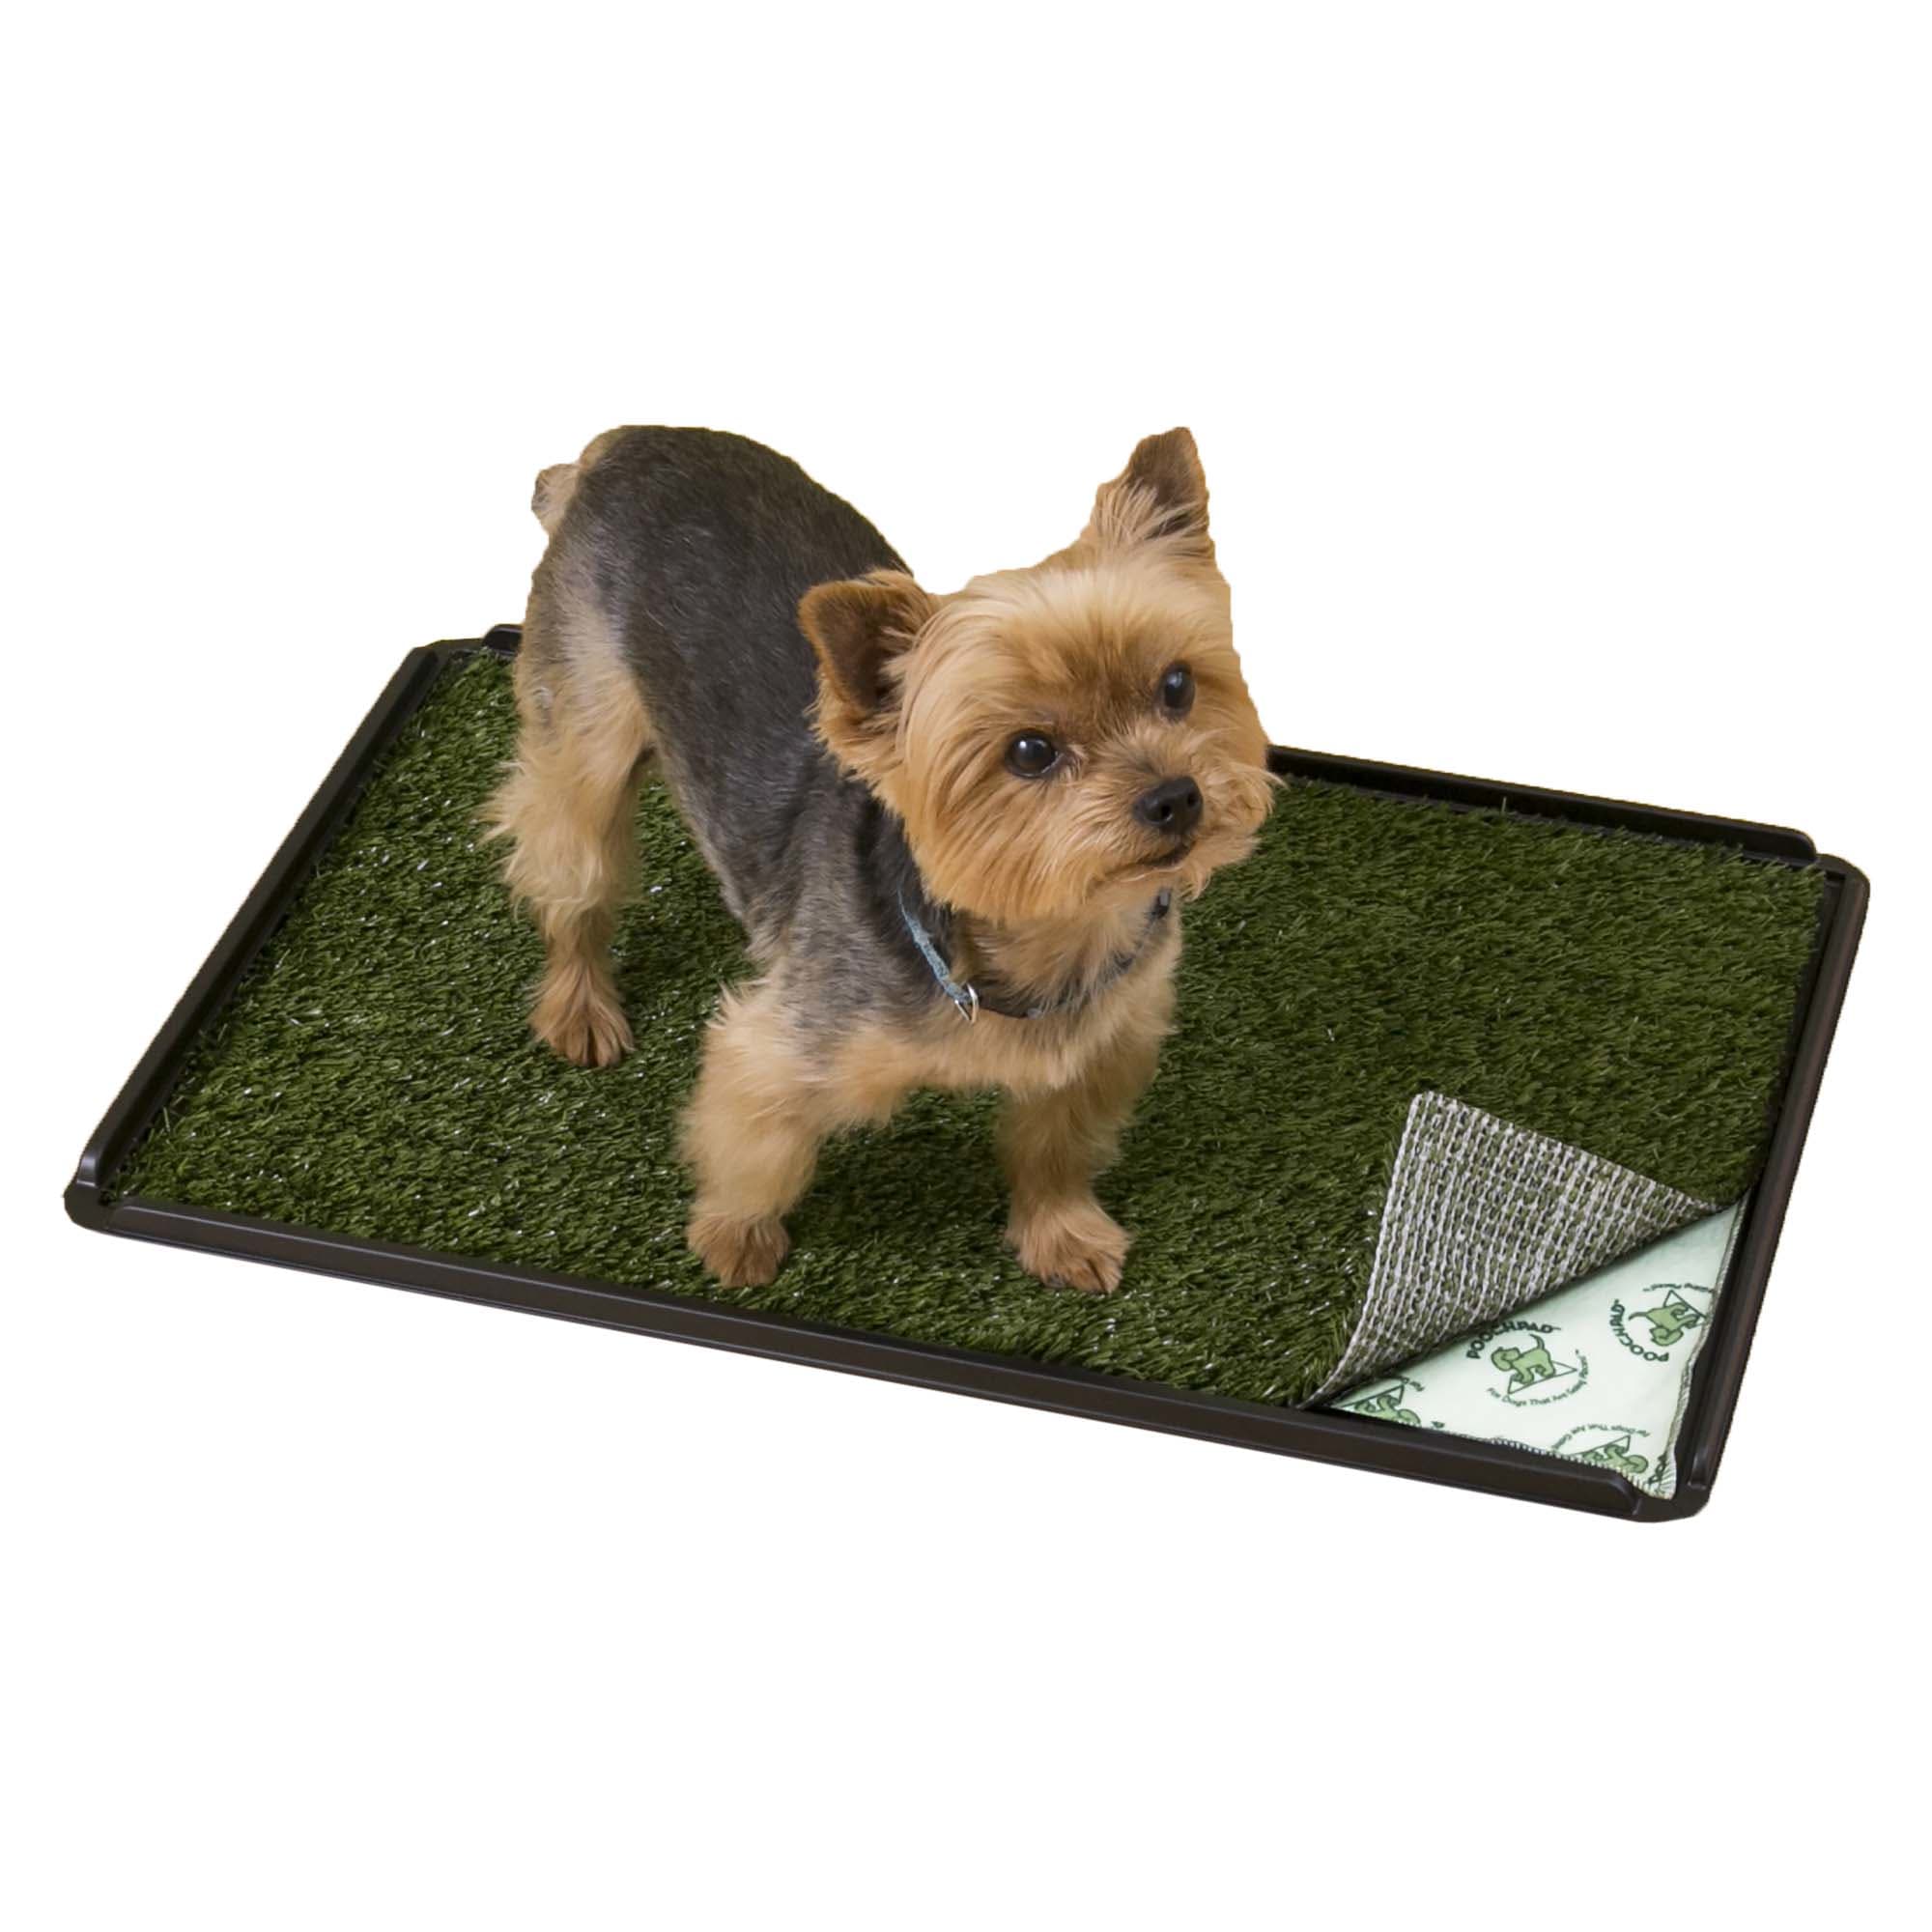  Pee Pad Holder for Small Dogs Indoor Potty Training Tray for  Little Puppy or Cat Litter Mat Only(Very Small) : Pet Supplies